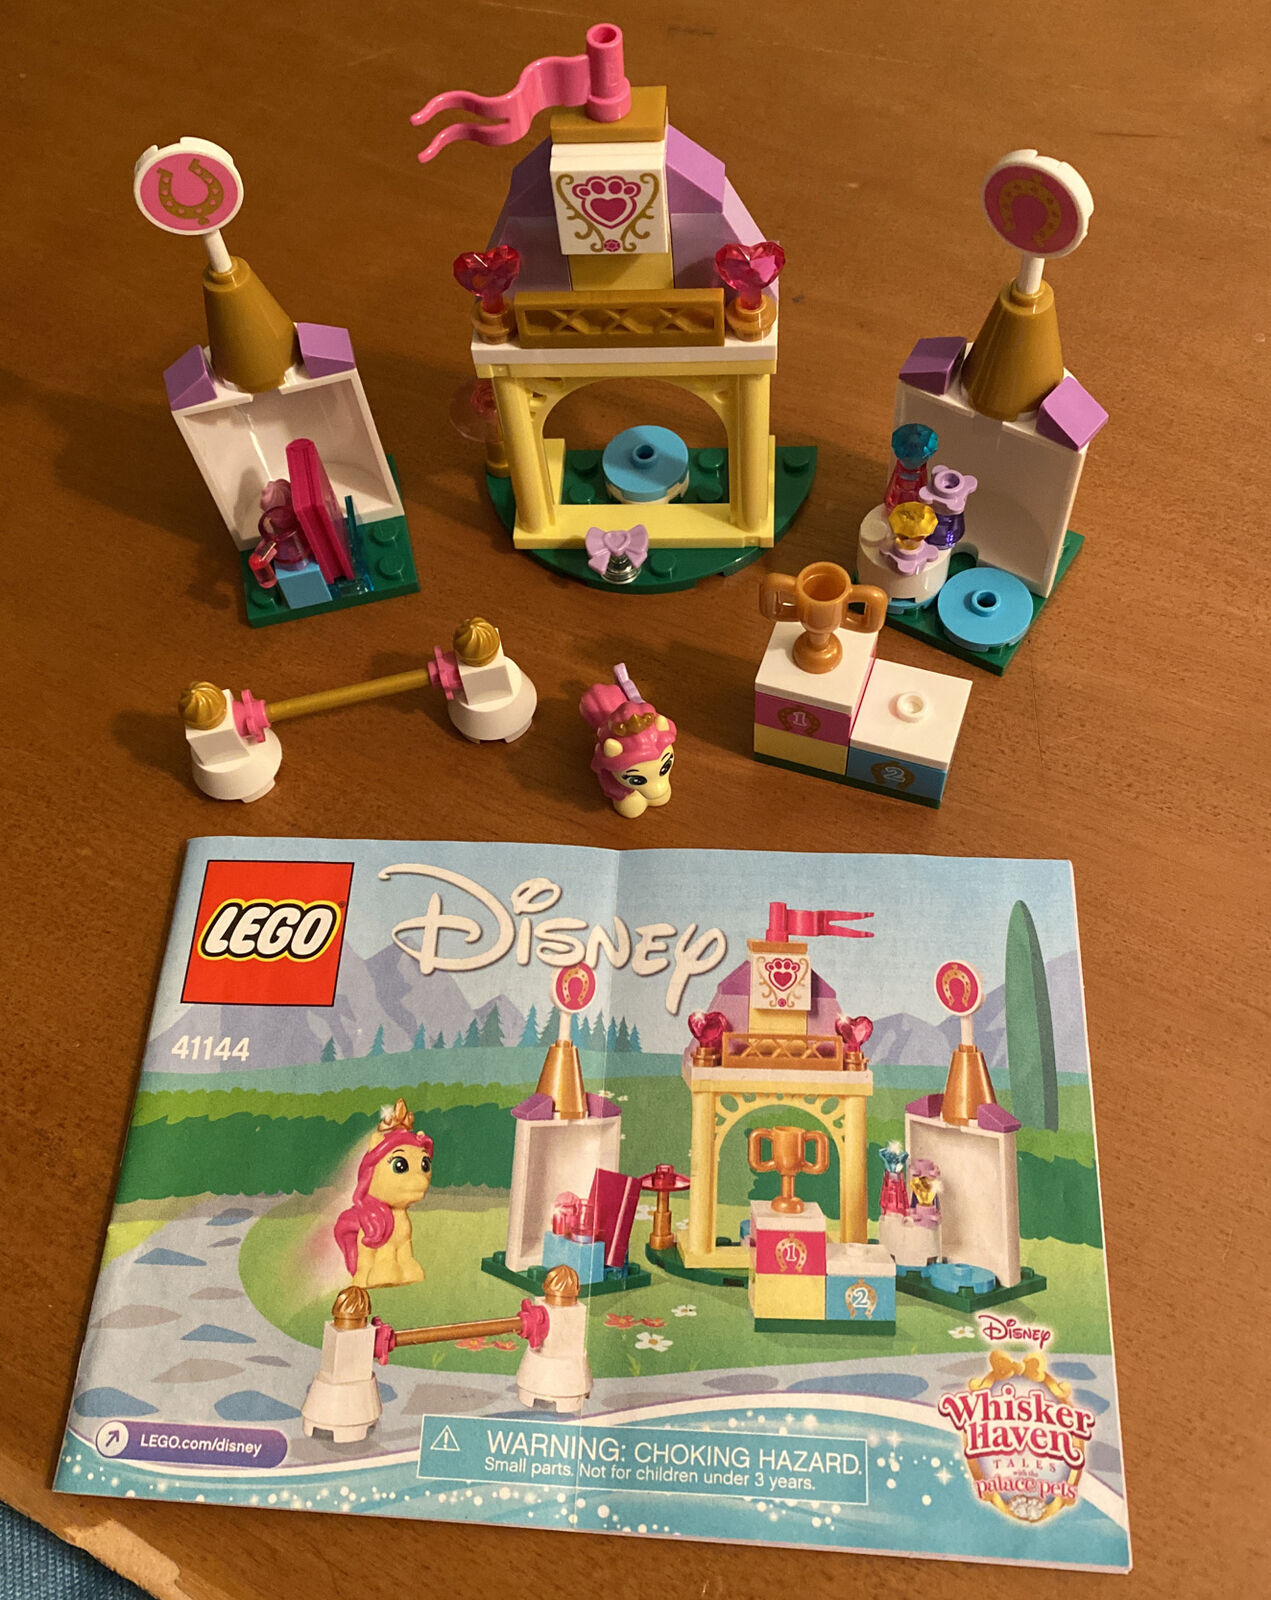 vogn Rug Hollywood Lego Disney Whisker Haven Tales with the Palace Pets 41144 - Complete - No  Box | eBay